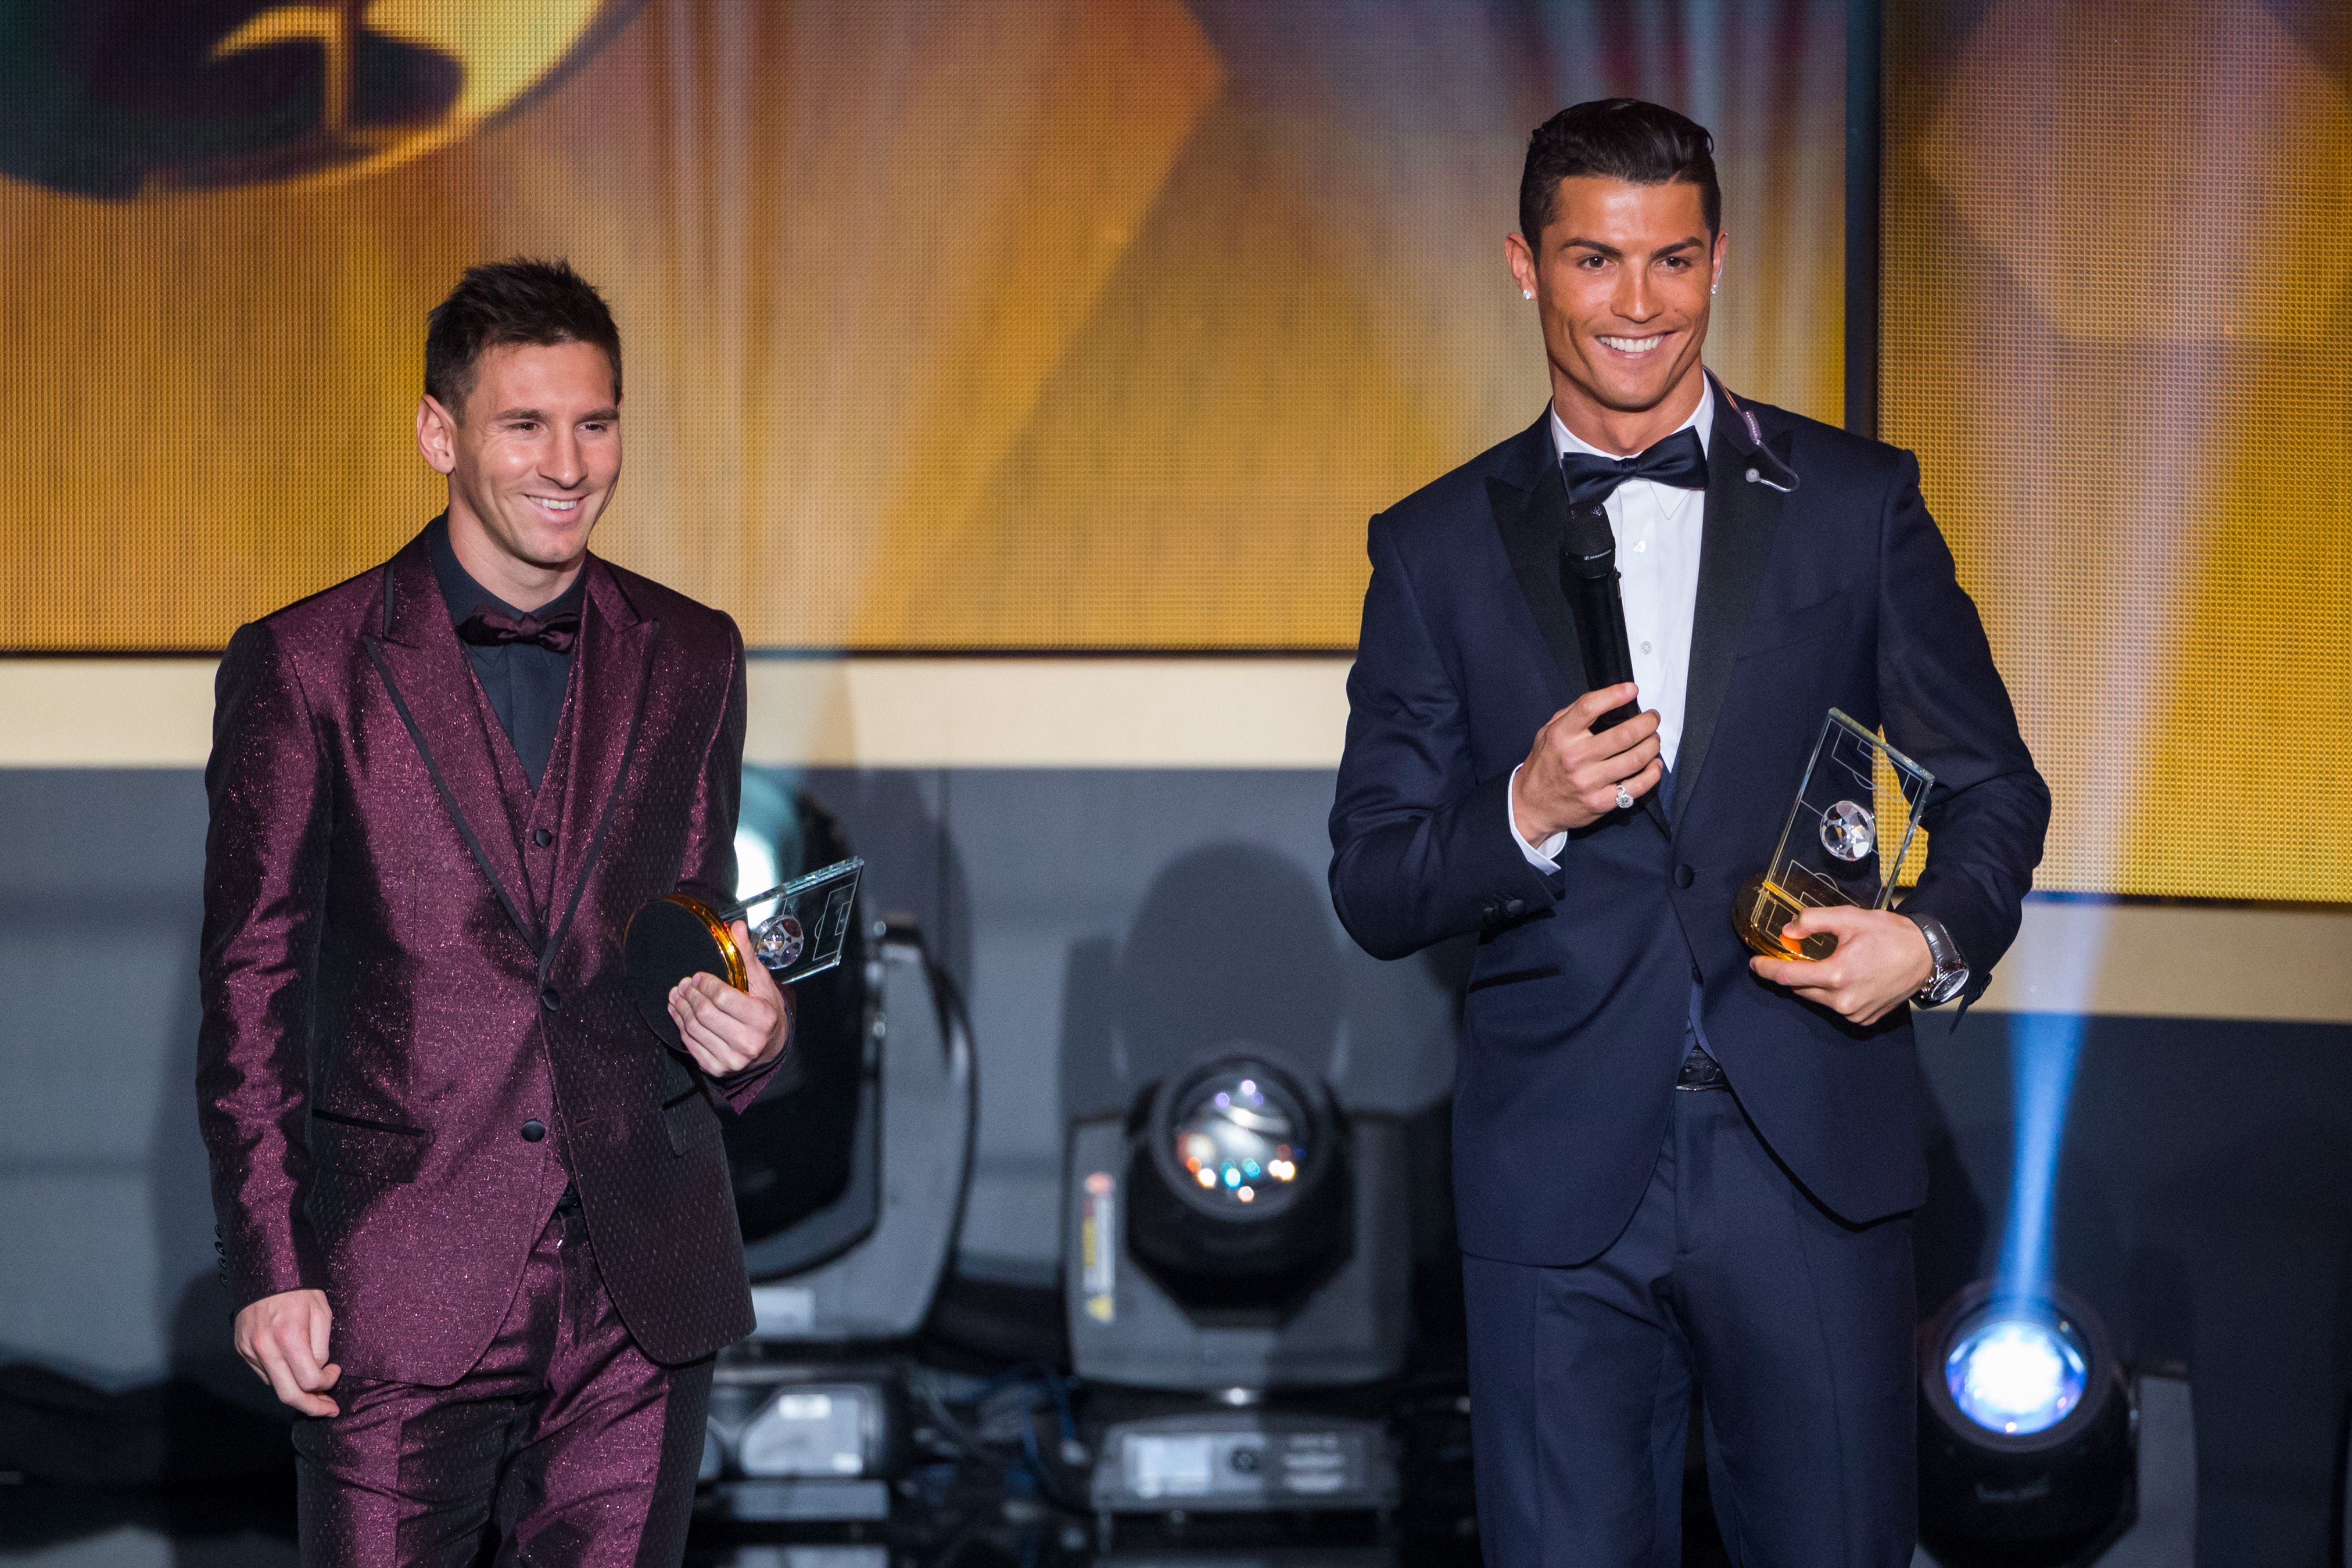  FIFA Ballon d'Or nominees Lionel Messi of Argentina and FC Barcelona (L) and Cristiano Ronaldo of Portugal and Real Madrid smile during the FIFA Ballon d'Or Gala 2014 at the Kongresshaus on January 12, 2015 in Zurich, Switzerland